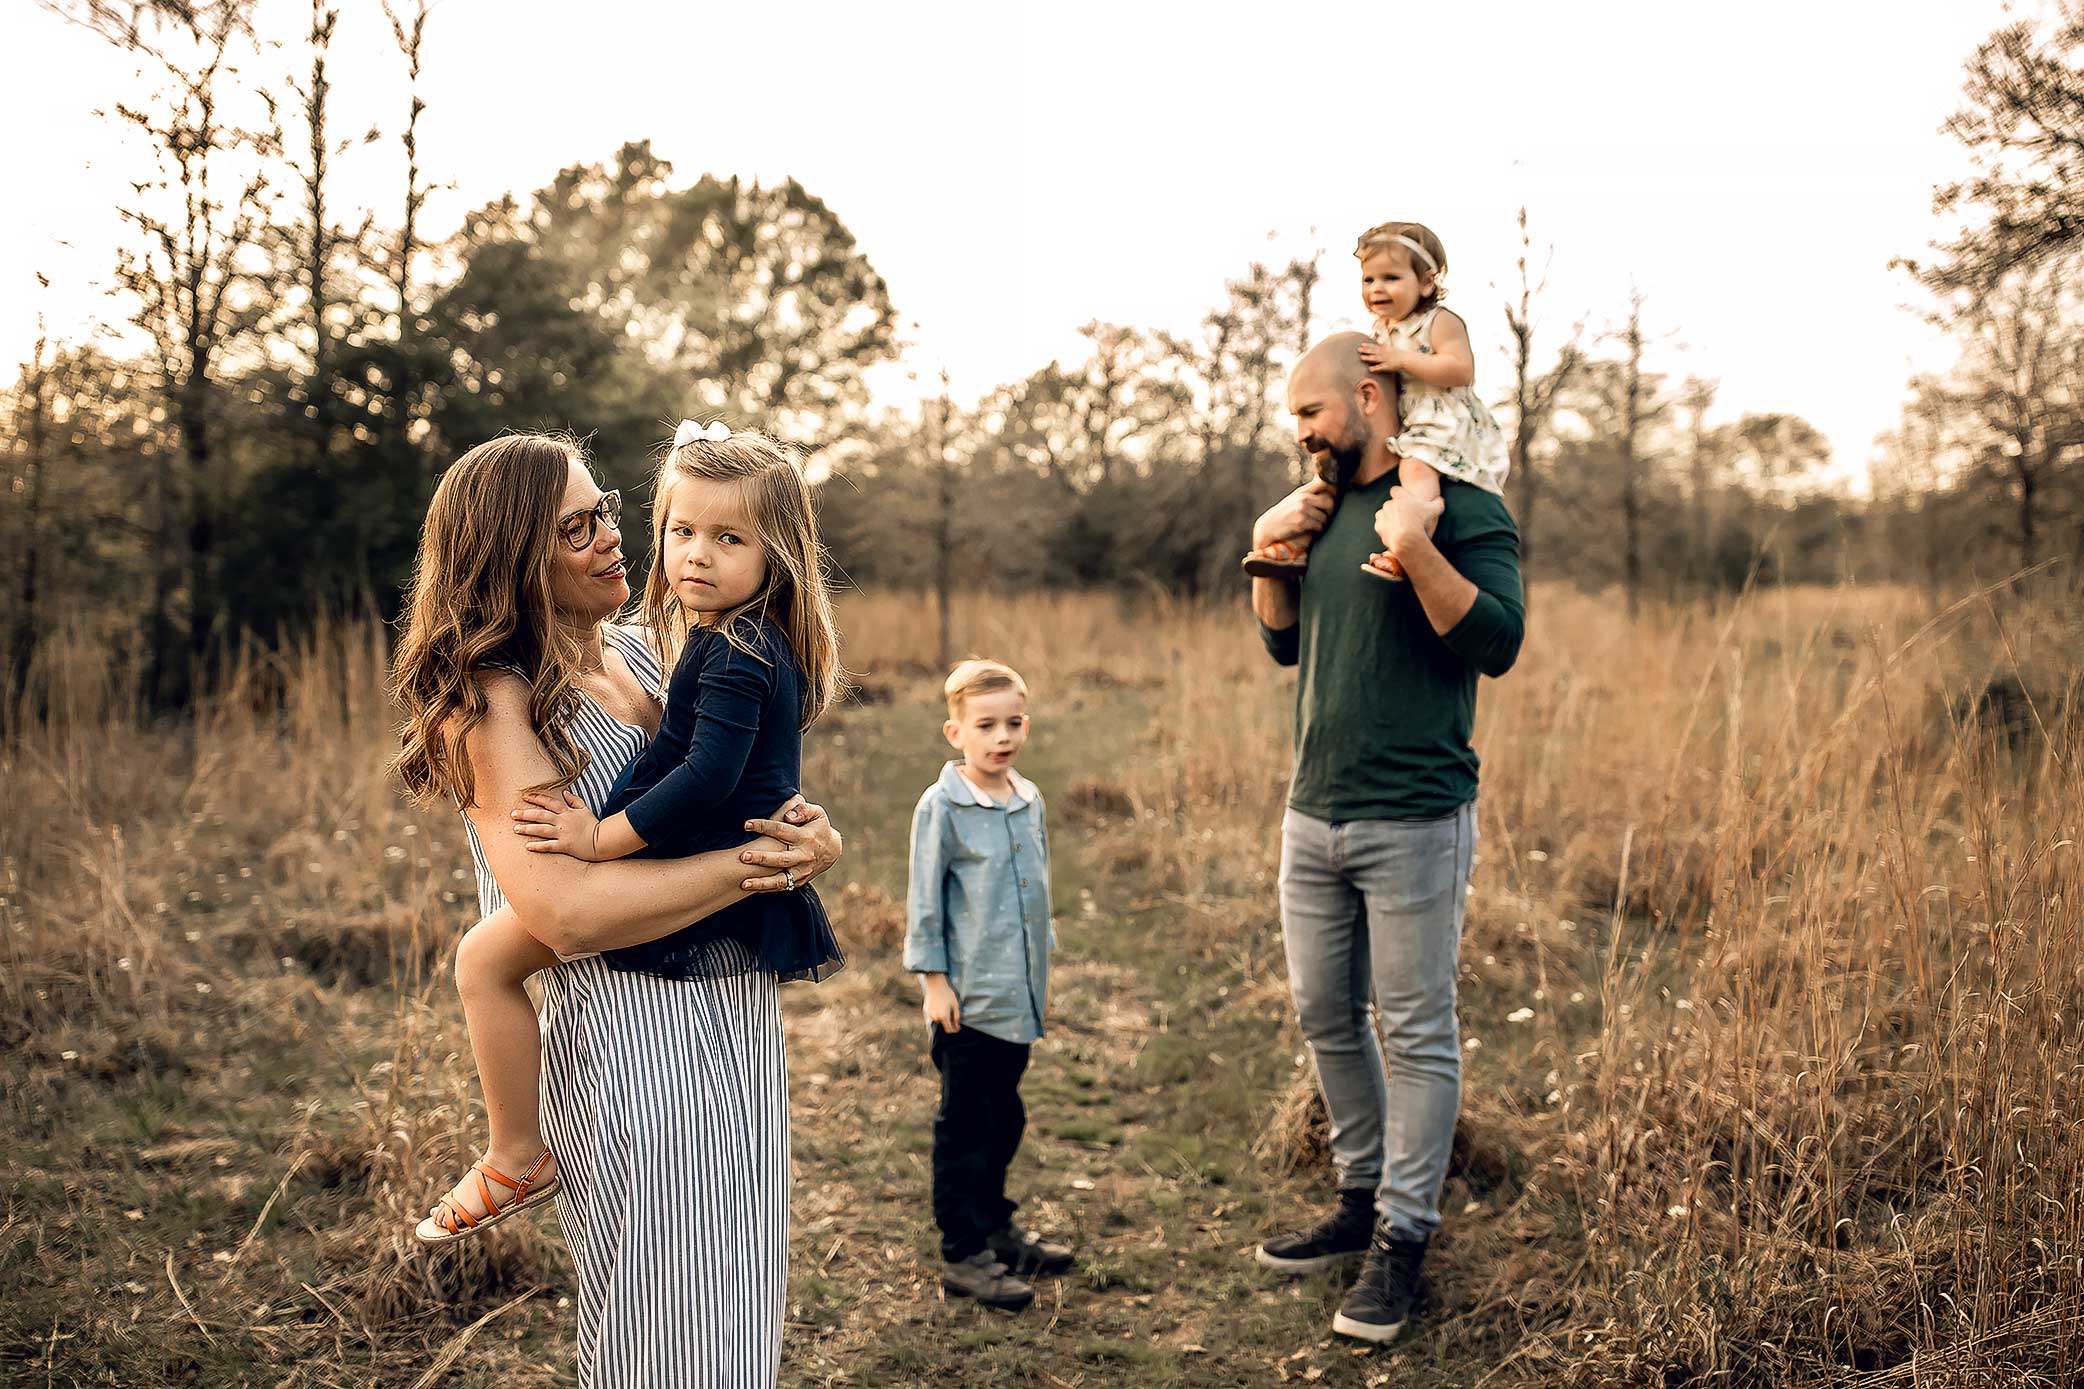 shelby-schiller-photography-lifestyle-family-session-with-3-kids-spring-2019-green-blue-yellow-college-station-8.jpg